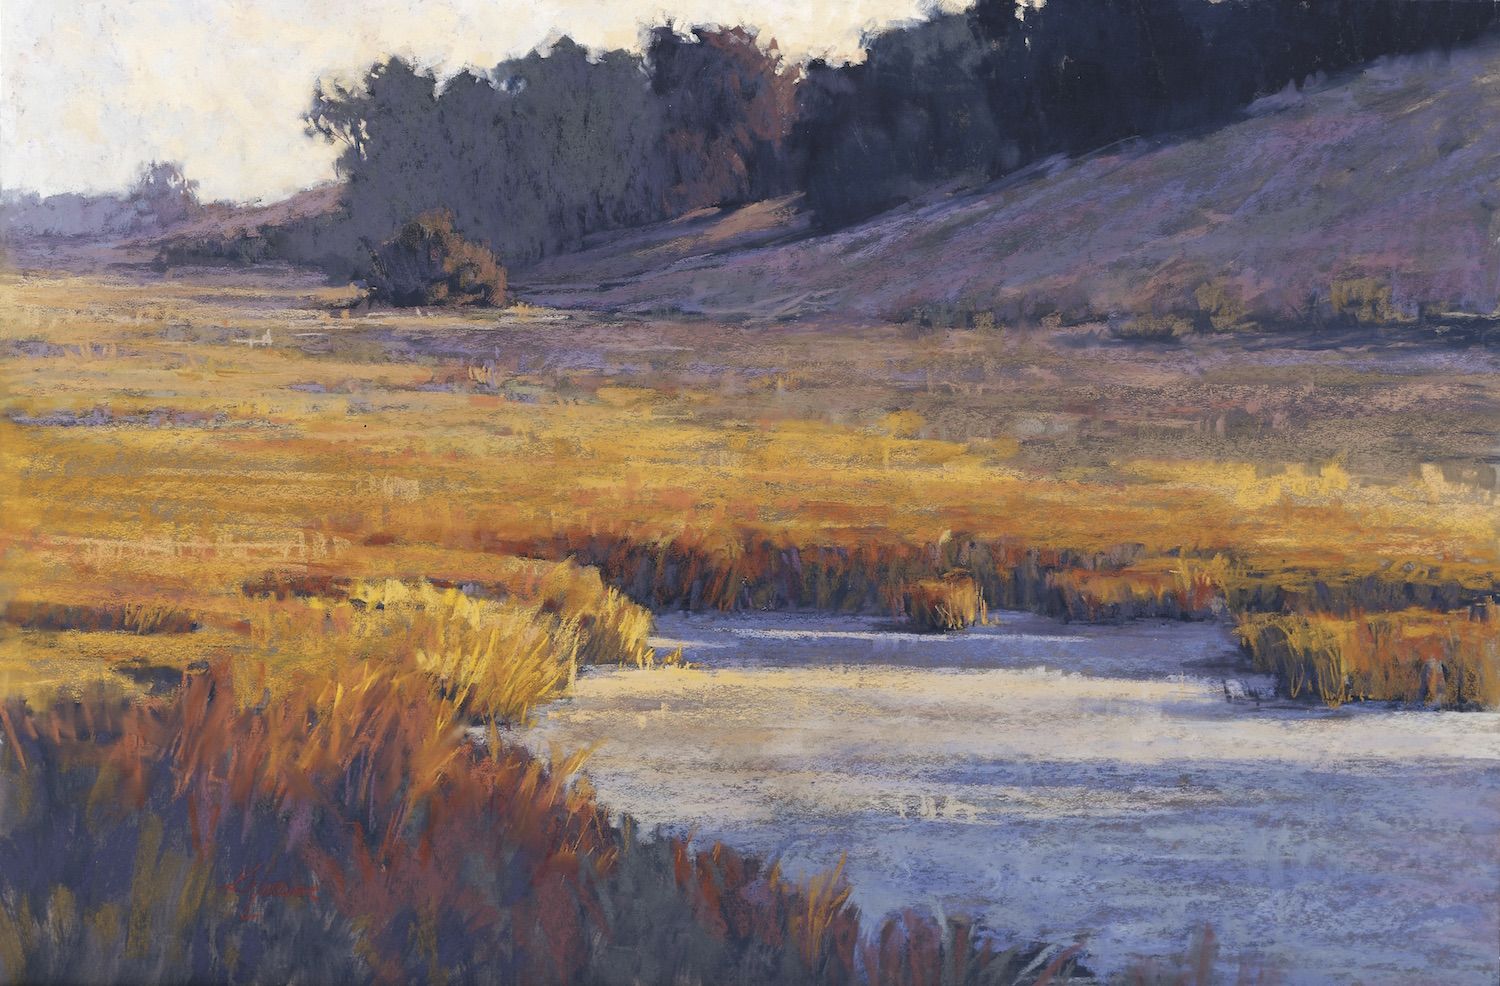 20 Pastel Works and Words of Wisdom from 20 Award-Winning Artists